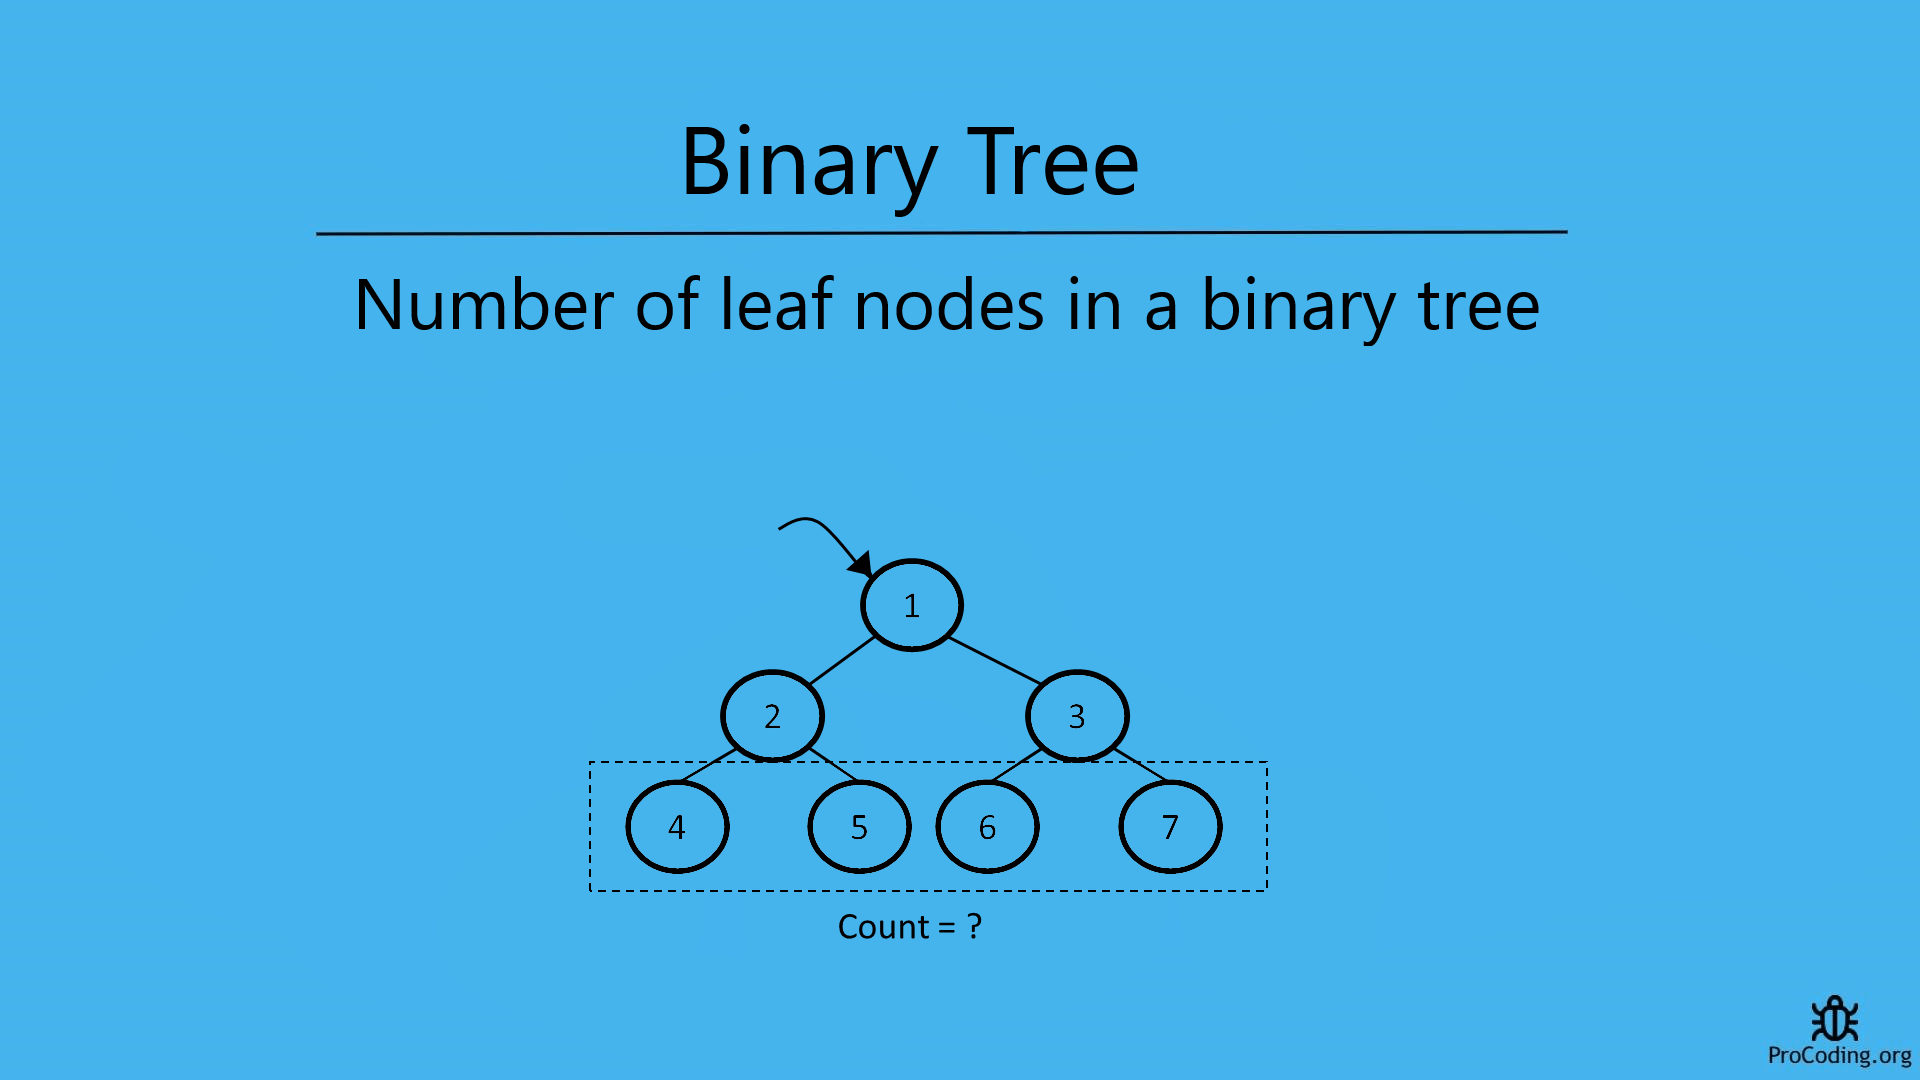 Number of leaf nodes in a binary tree